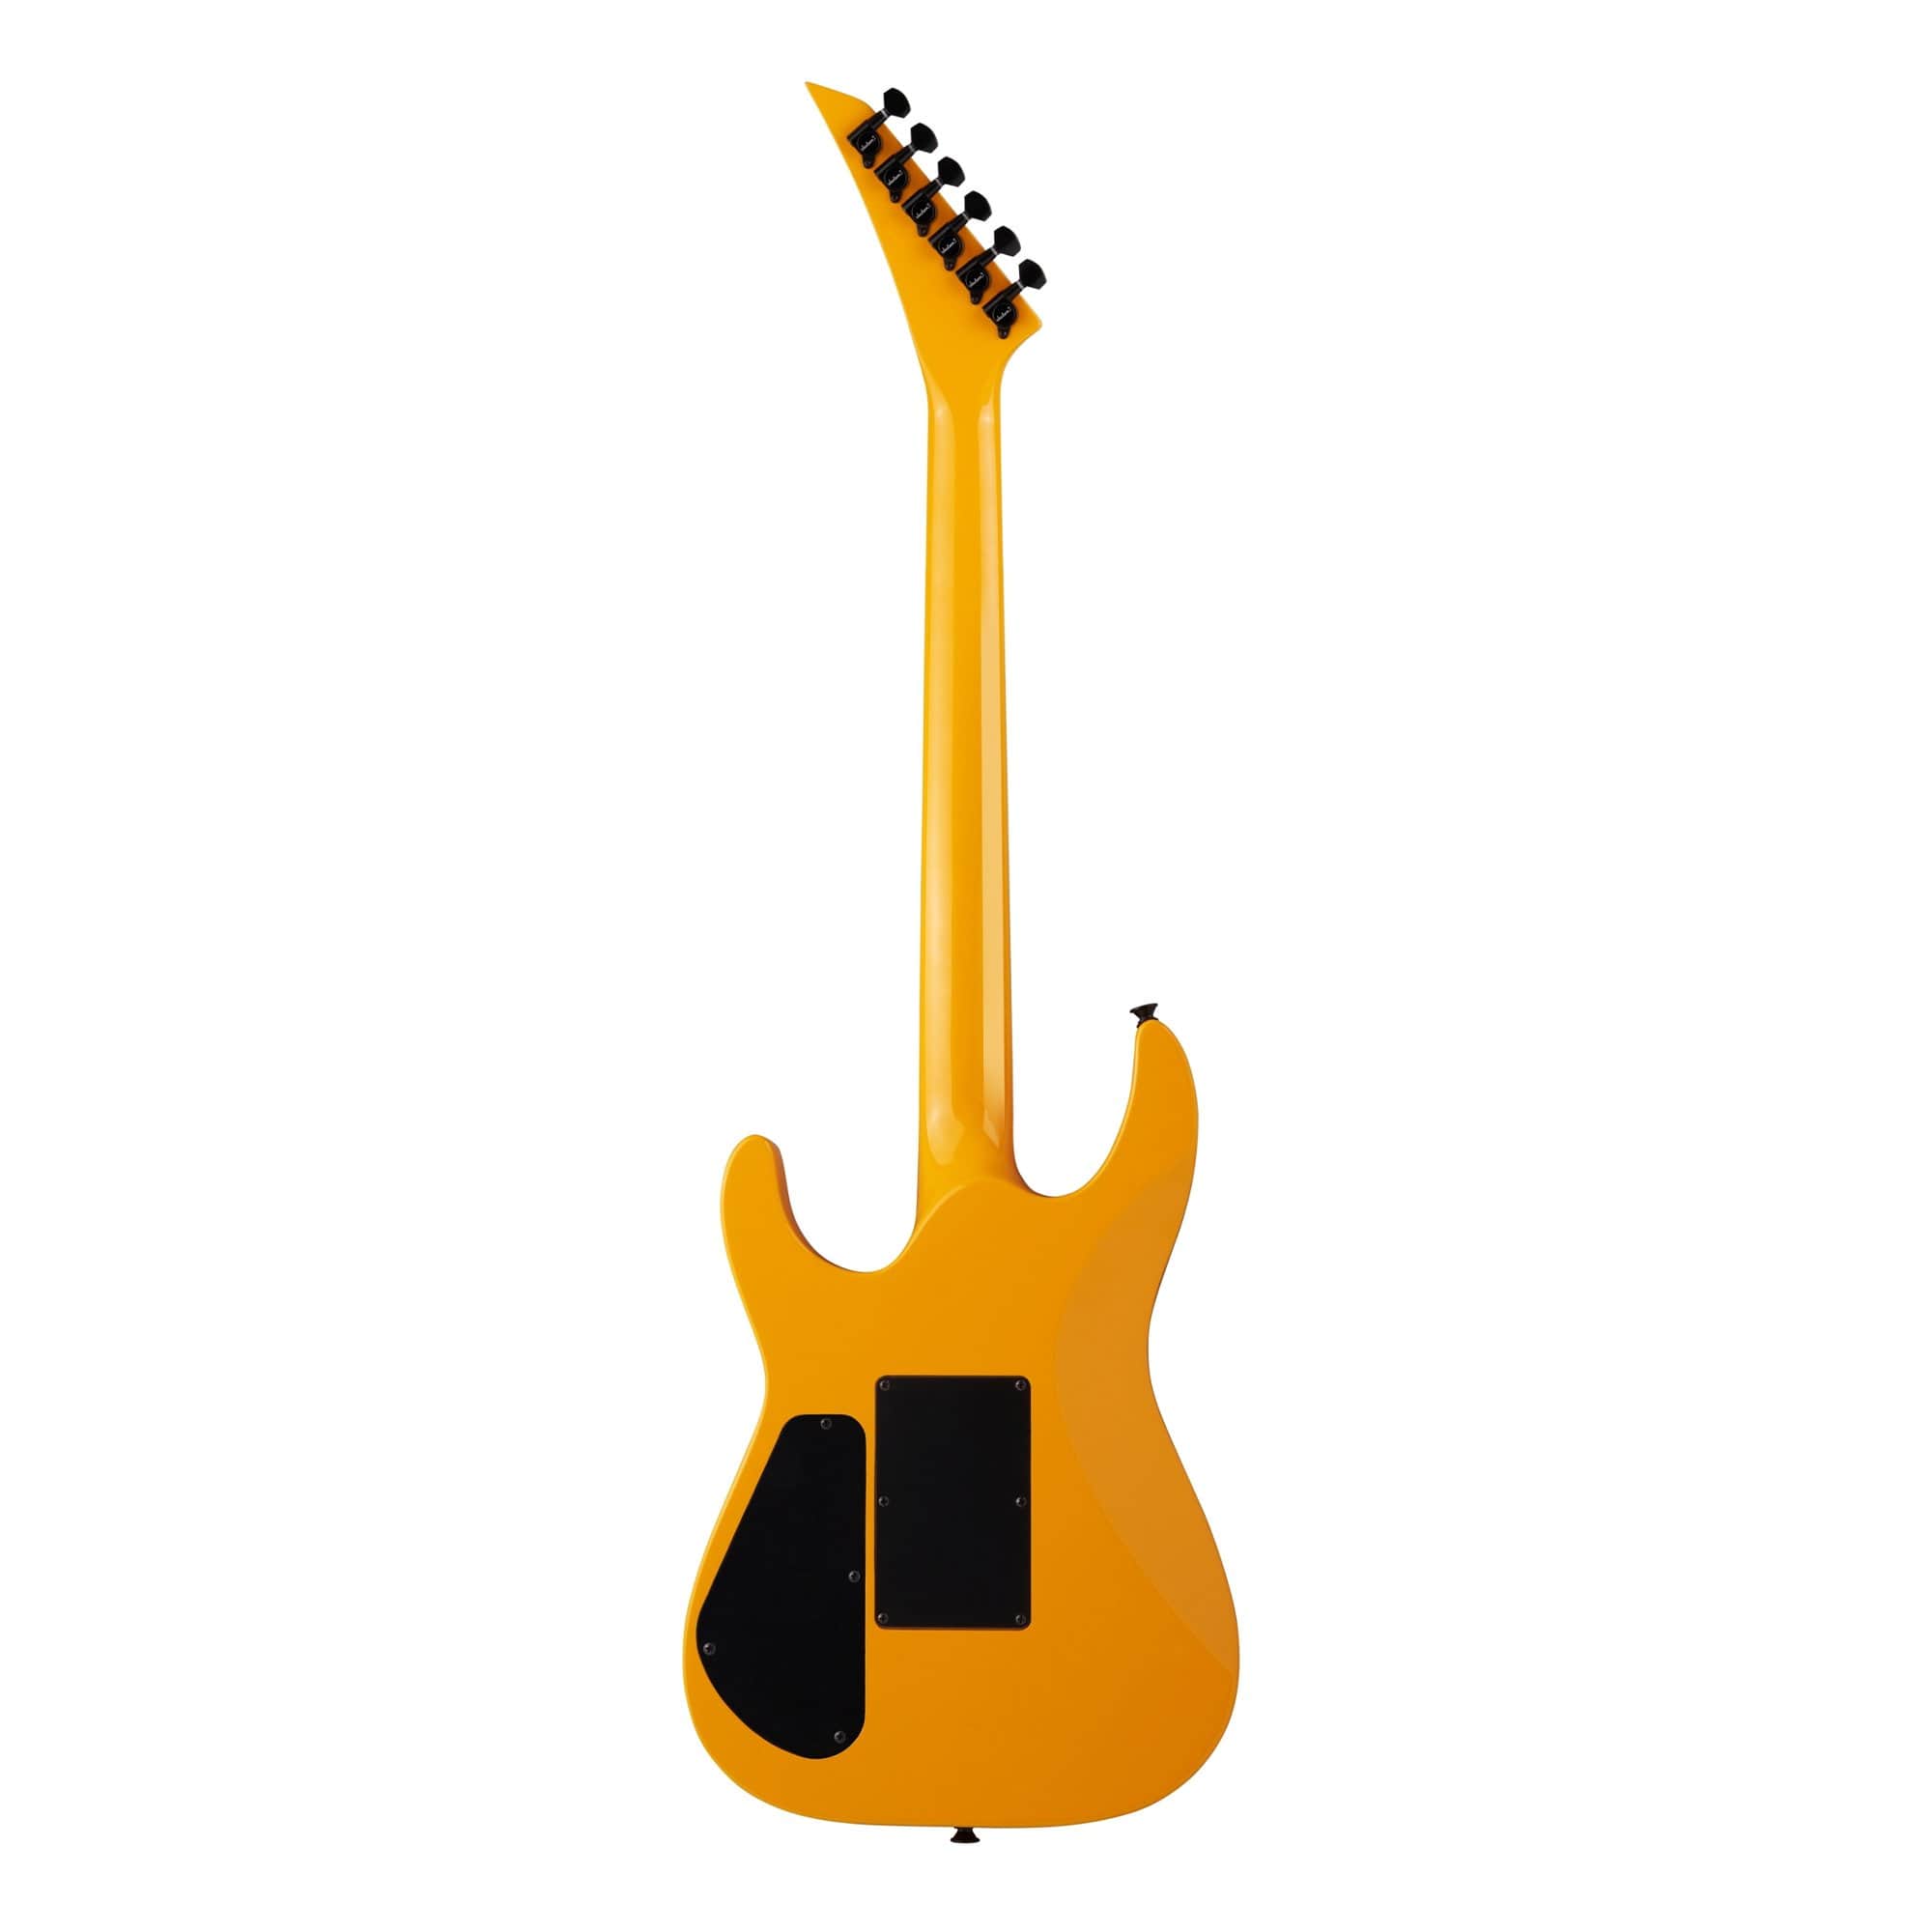 Jackson X Series Soloist SL1X Taxi Cab Yellow Electric Guitars / Solid Body